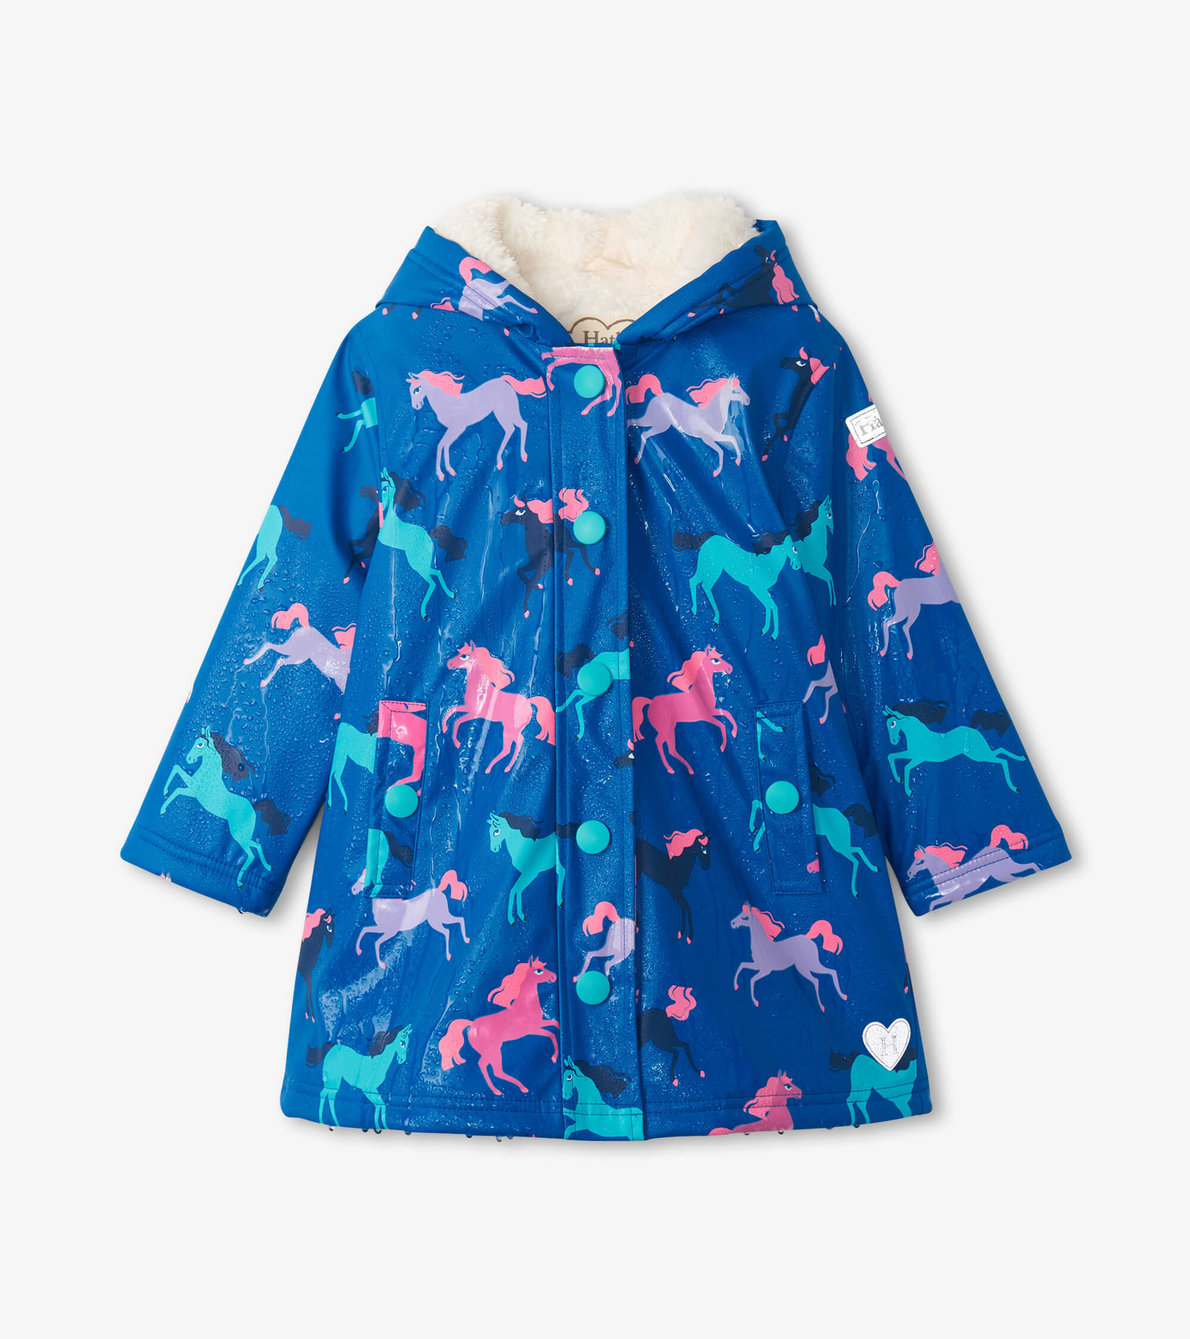 View larger image of Girls Prancing Horses Colour Changing Sherpa Lined Button-Up Raincoat